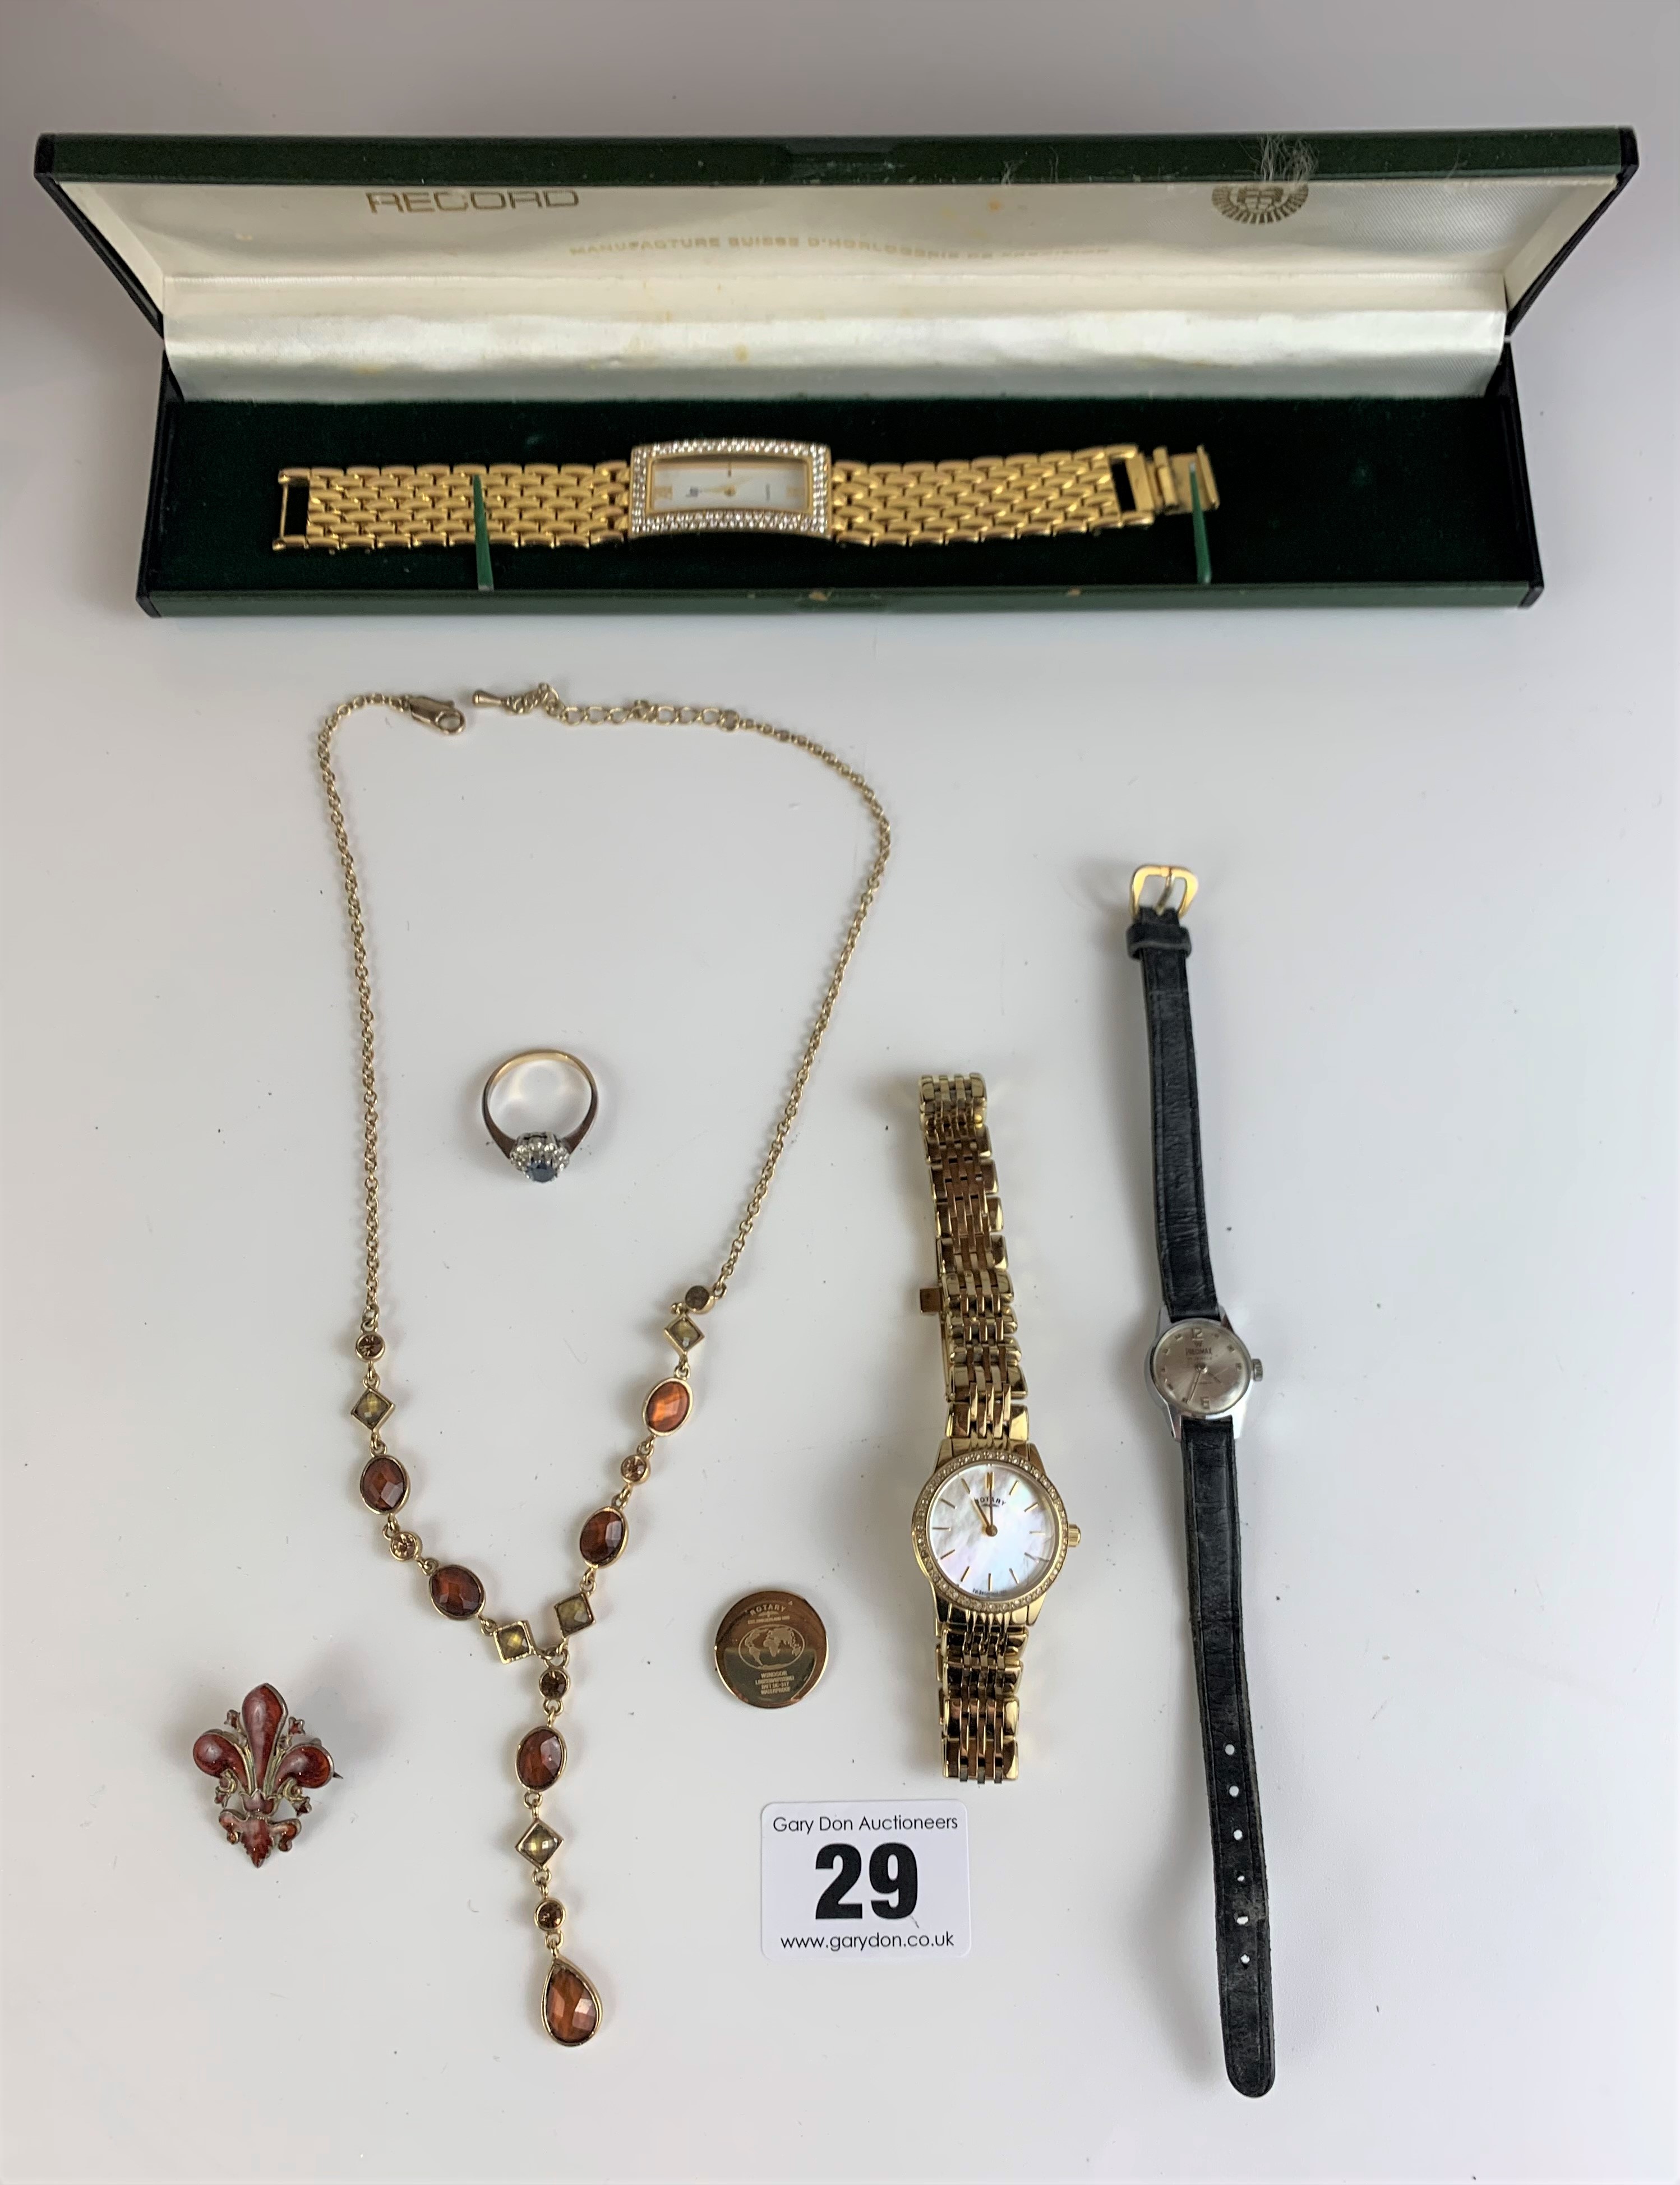 3 ladies dress watches, dress necklace, ring and brooch